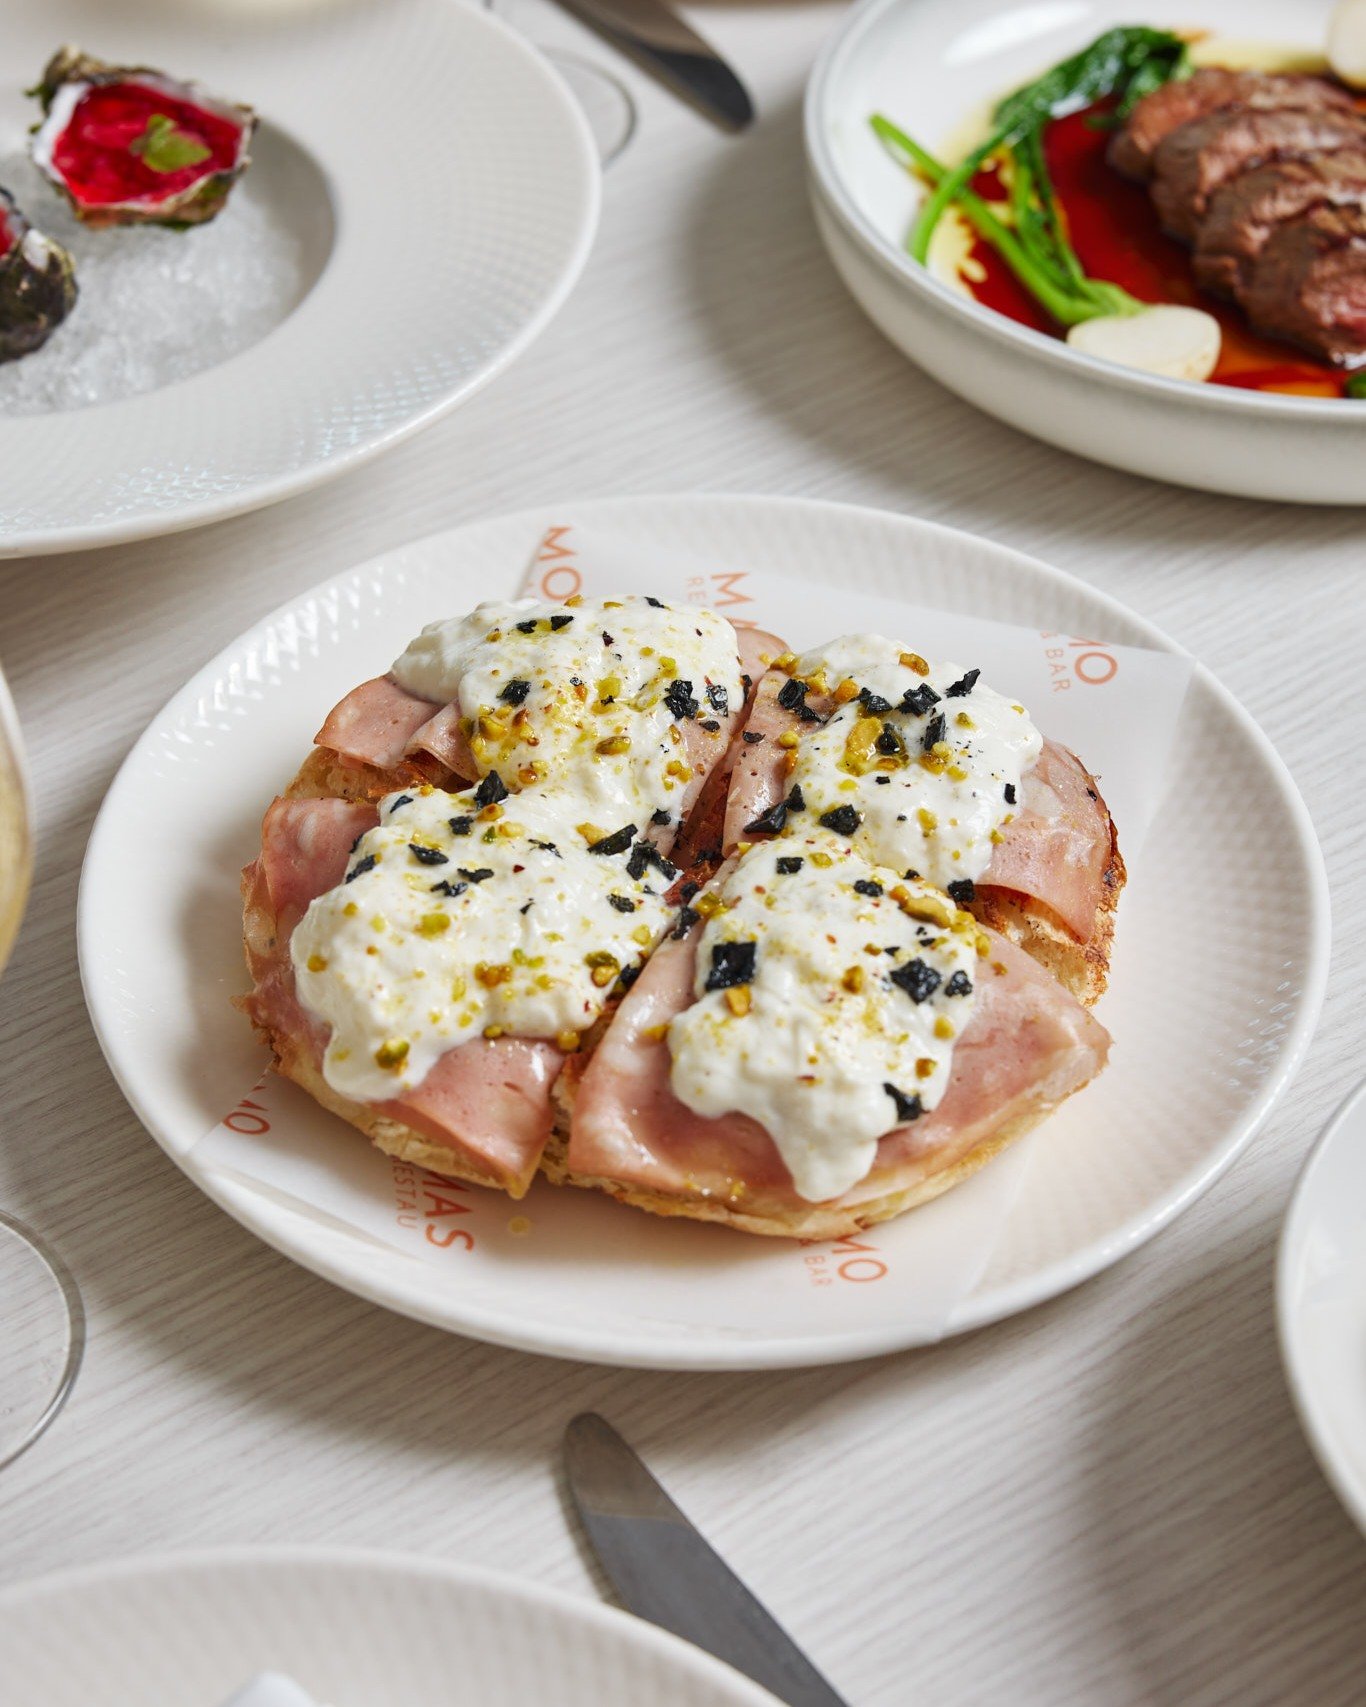 Our housemade focaccia topped with mortadella, stracciatella, and pistachio is a must-try! Available on our regular menu or as part of our $50 Pronto Banquet.

www.massimorestaurant.com.au/bookings for reservations or call us on (07) 3221 1663
123 Ea